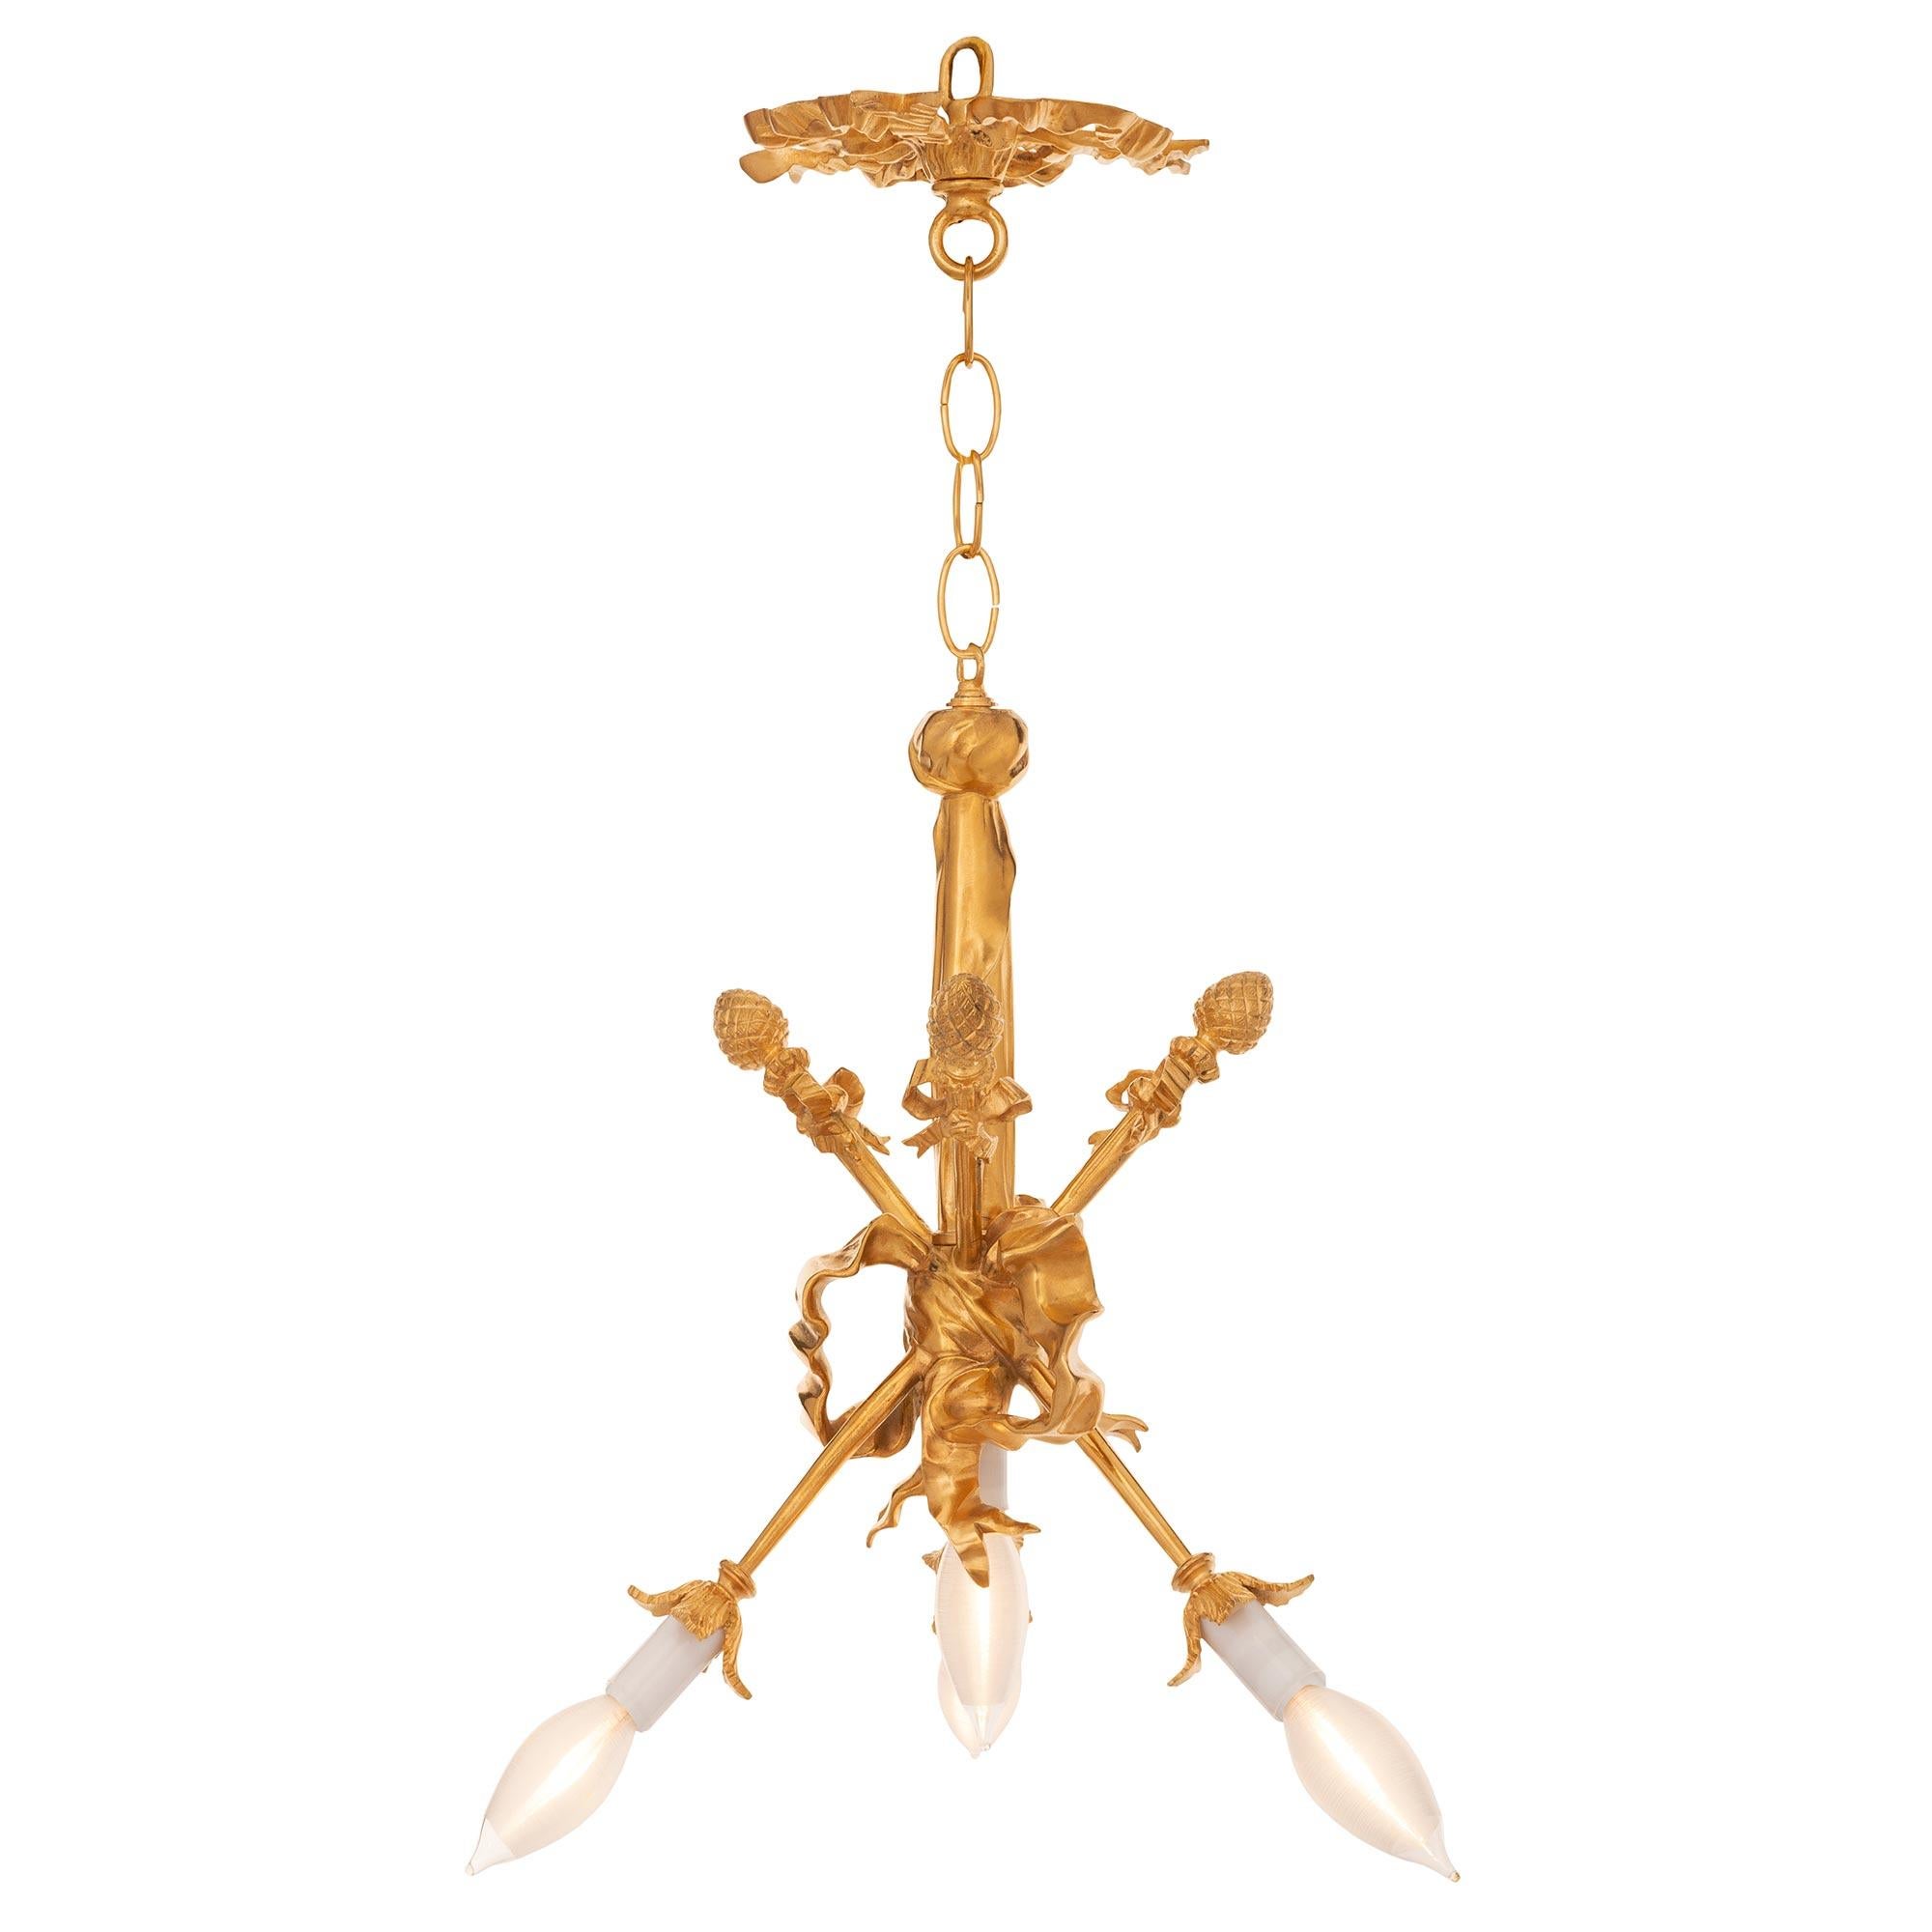 A striking and most unique pair of French 19th century Louis XVI st. ormolu chandeliers. Each three arm, four light chandelier is centered by a single light below a charming wonderfully executed flowing tied ribbon. The ribbon seemingly ties the